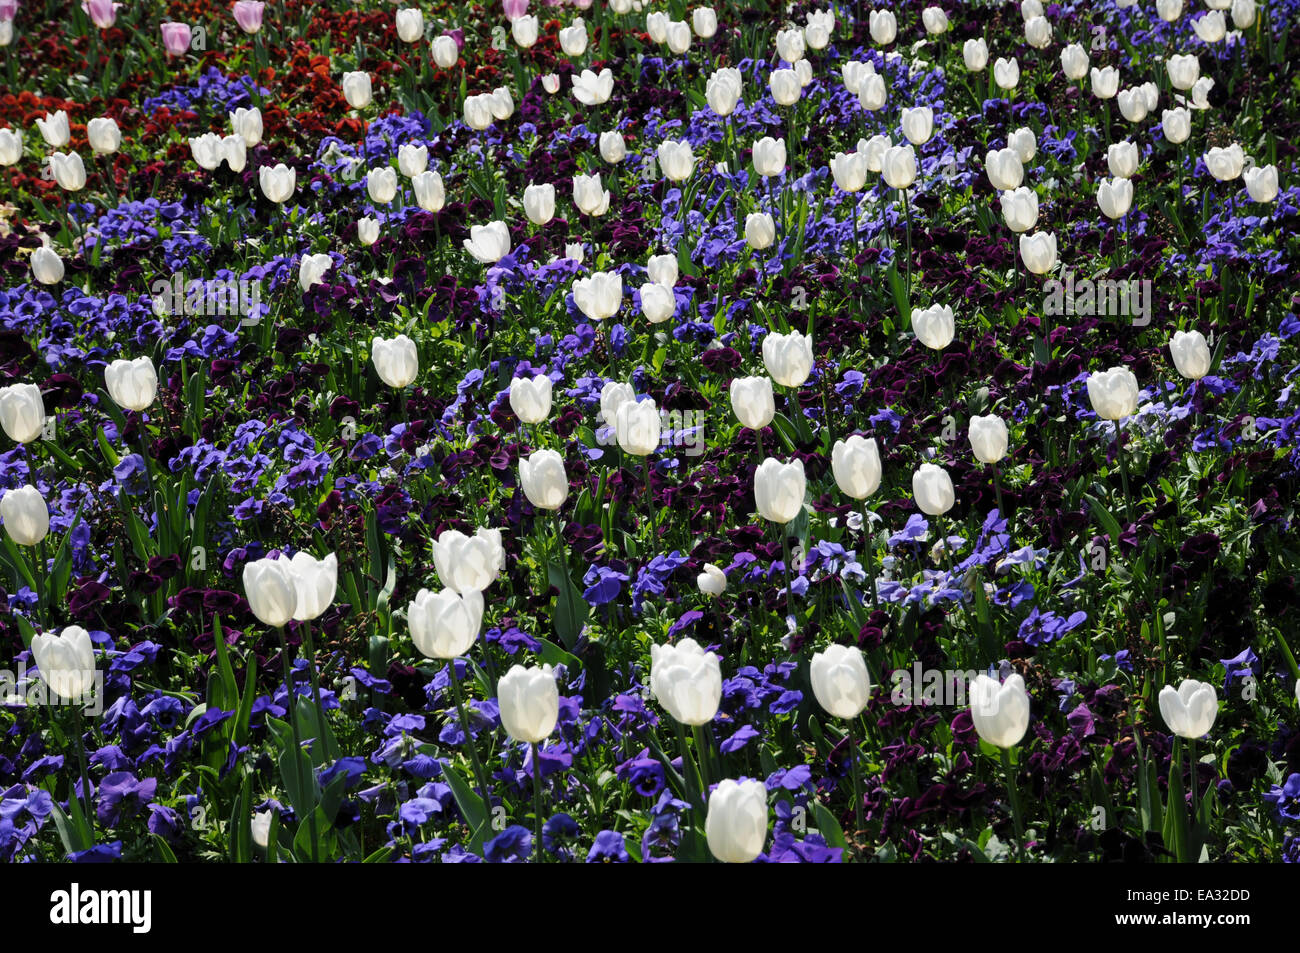 Tulips and pansies Stock Photo